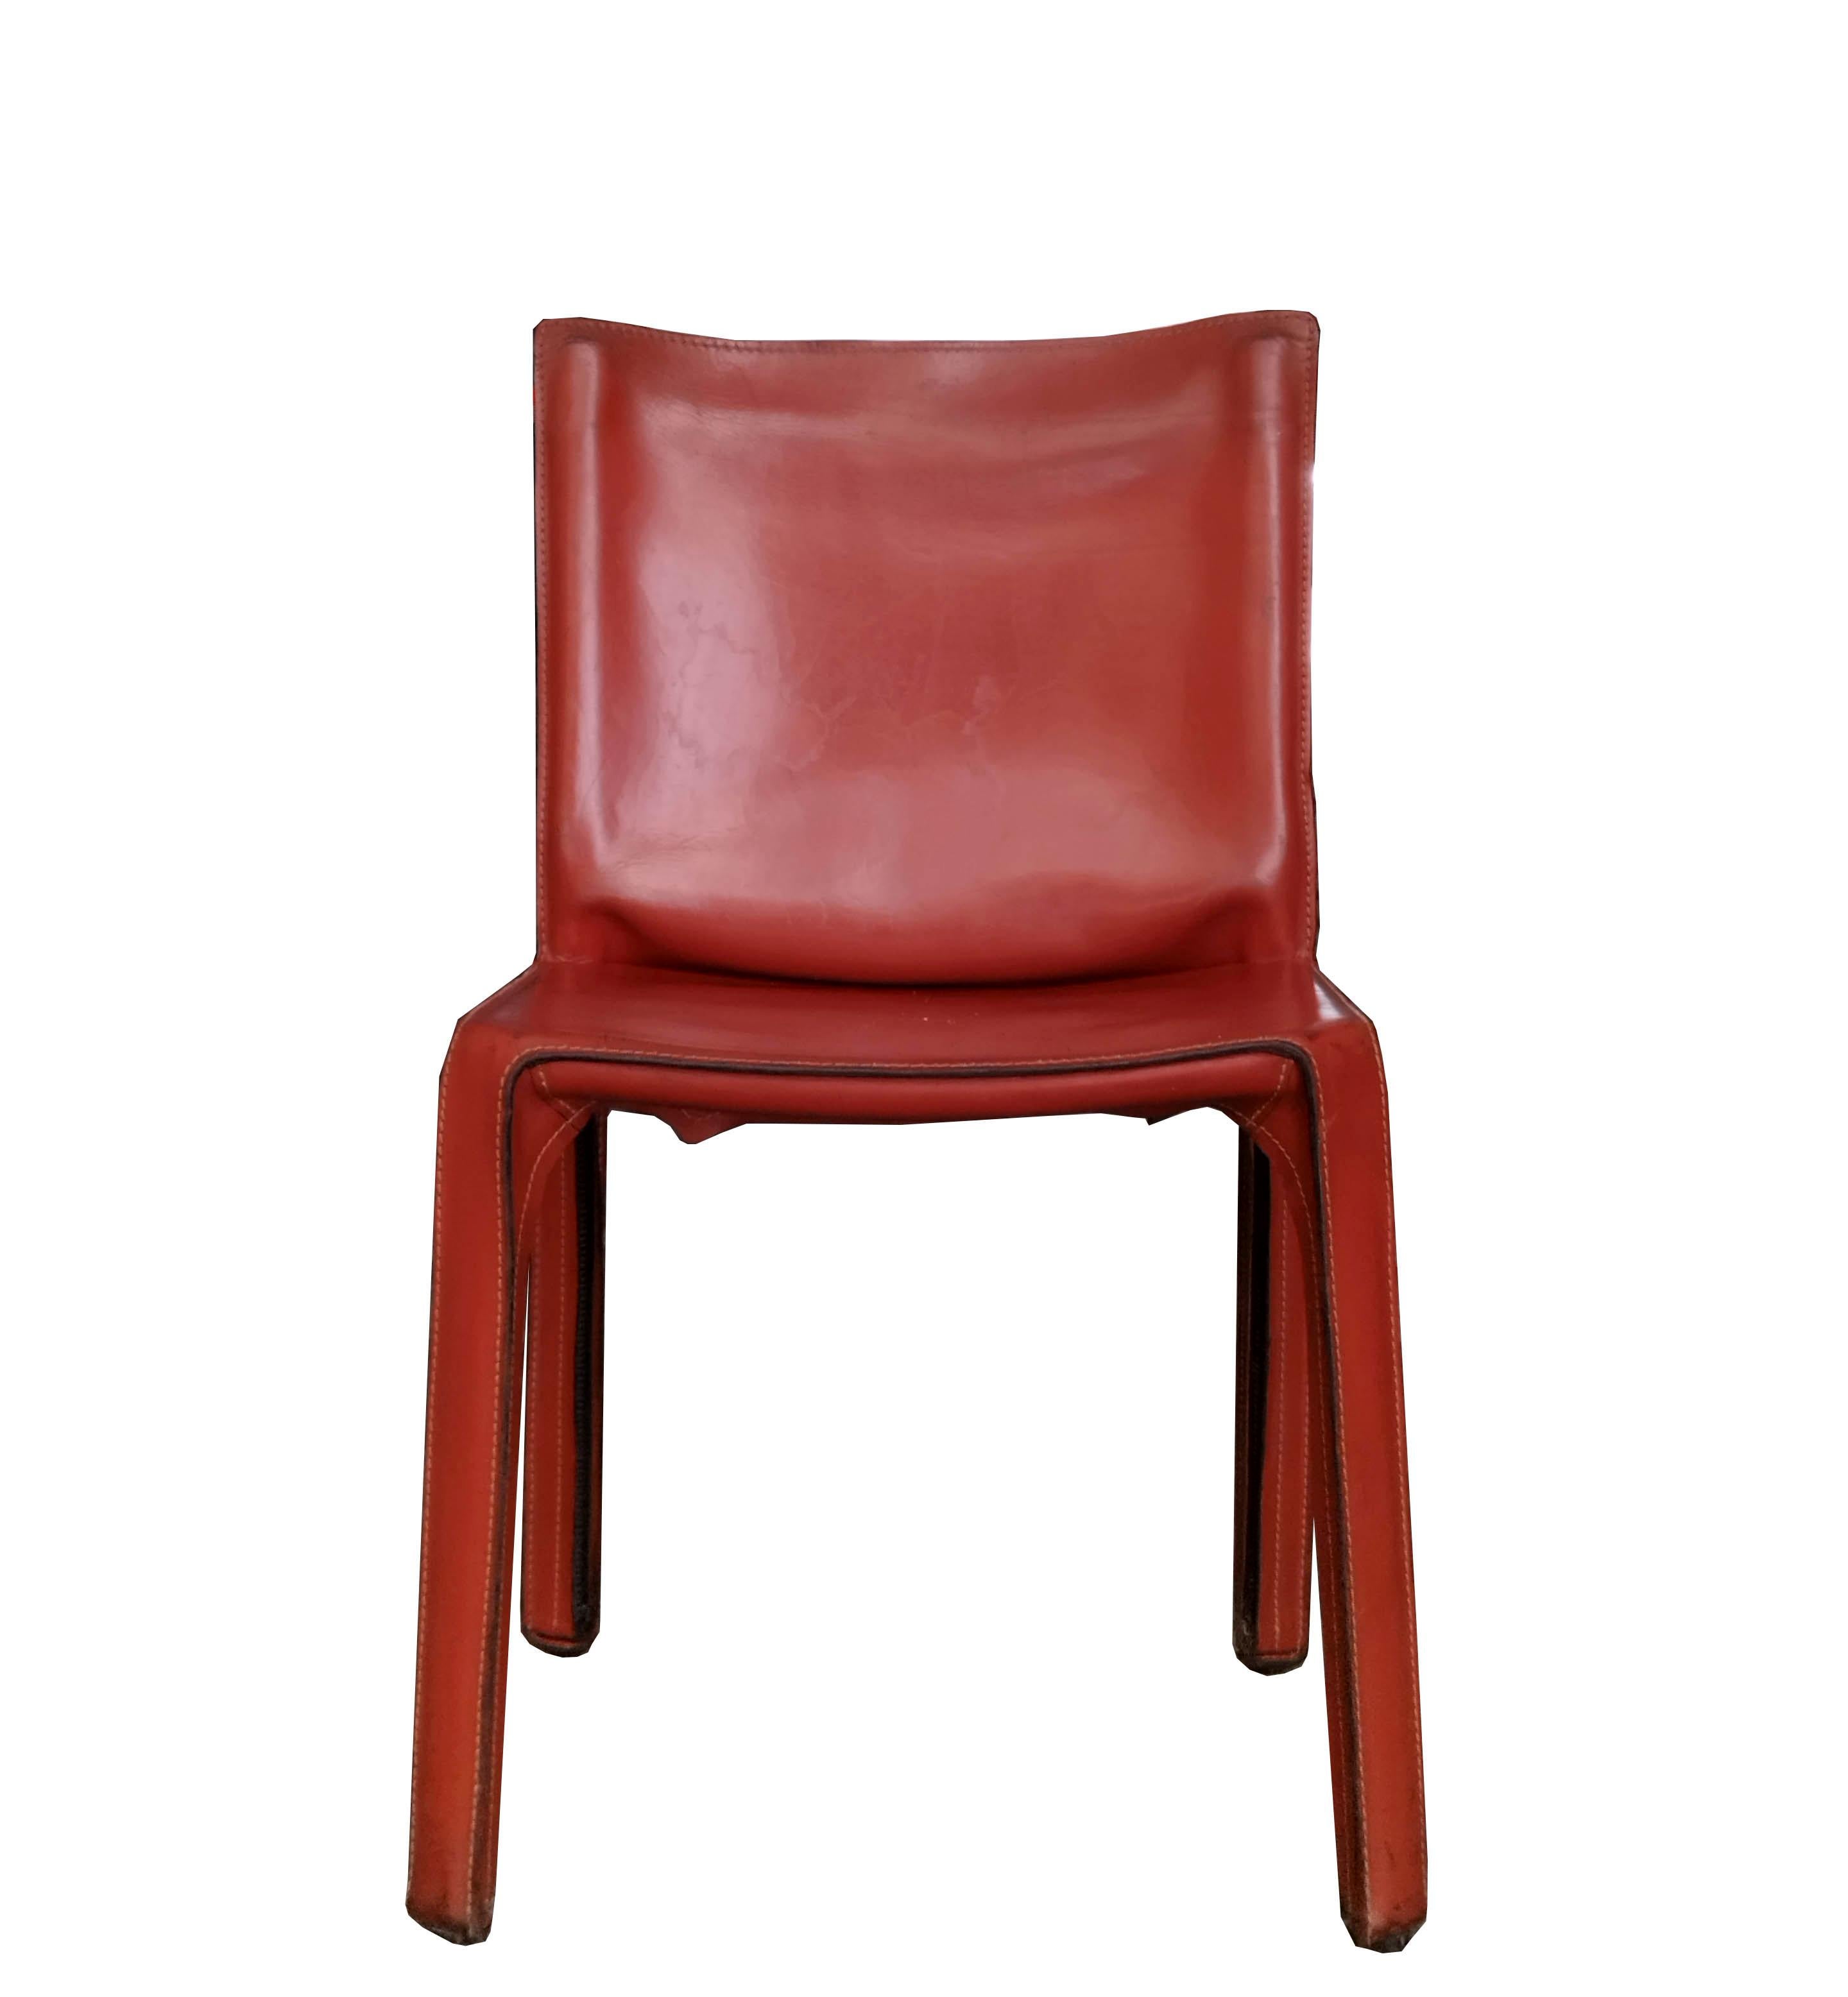 This iconic design by Mario Bellini for Cassina, circa 1970s, features the original caramel-colored leather. The bottom of the chairs bears the inscription - Cassina.